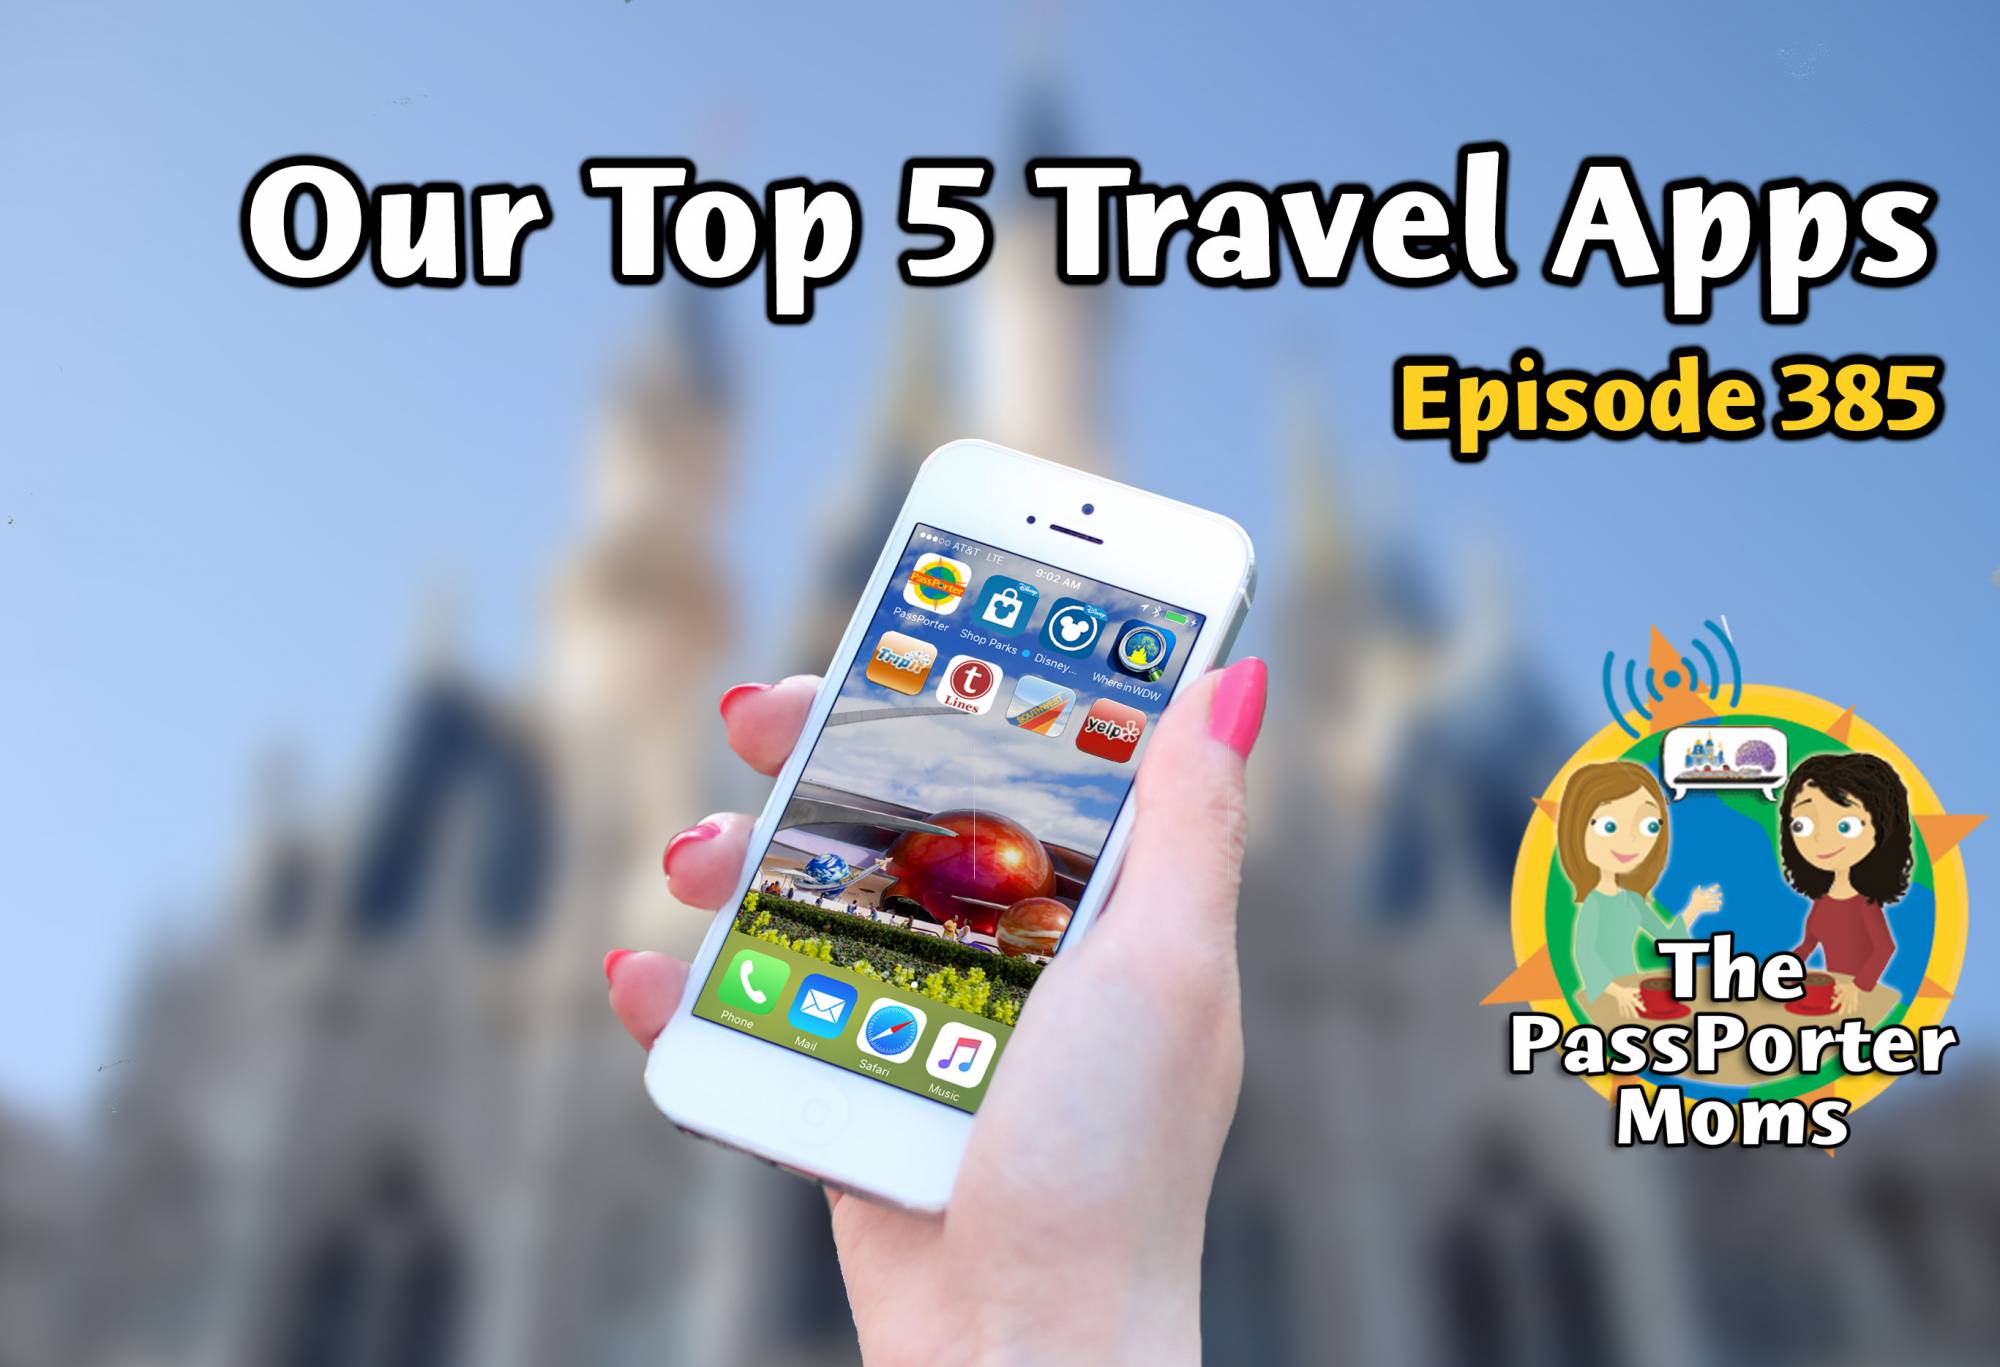 Our Top 5 Travel Apps